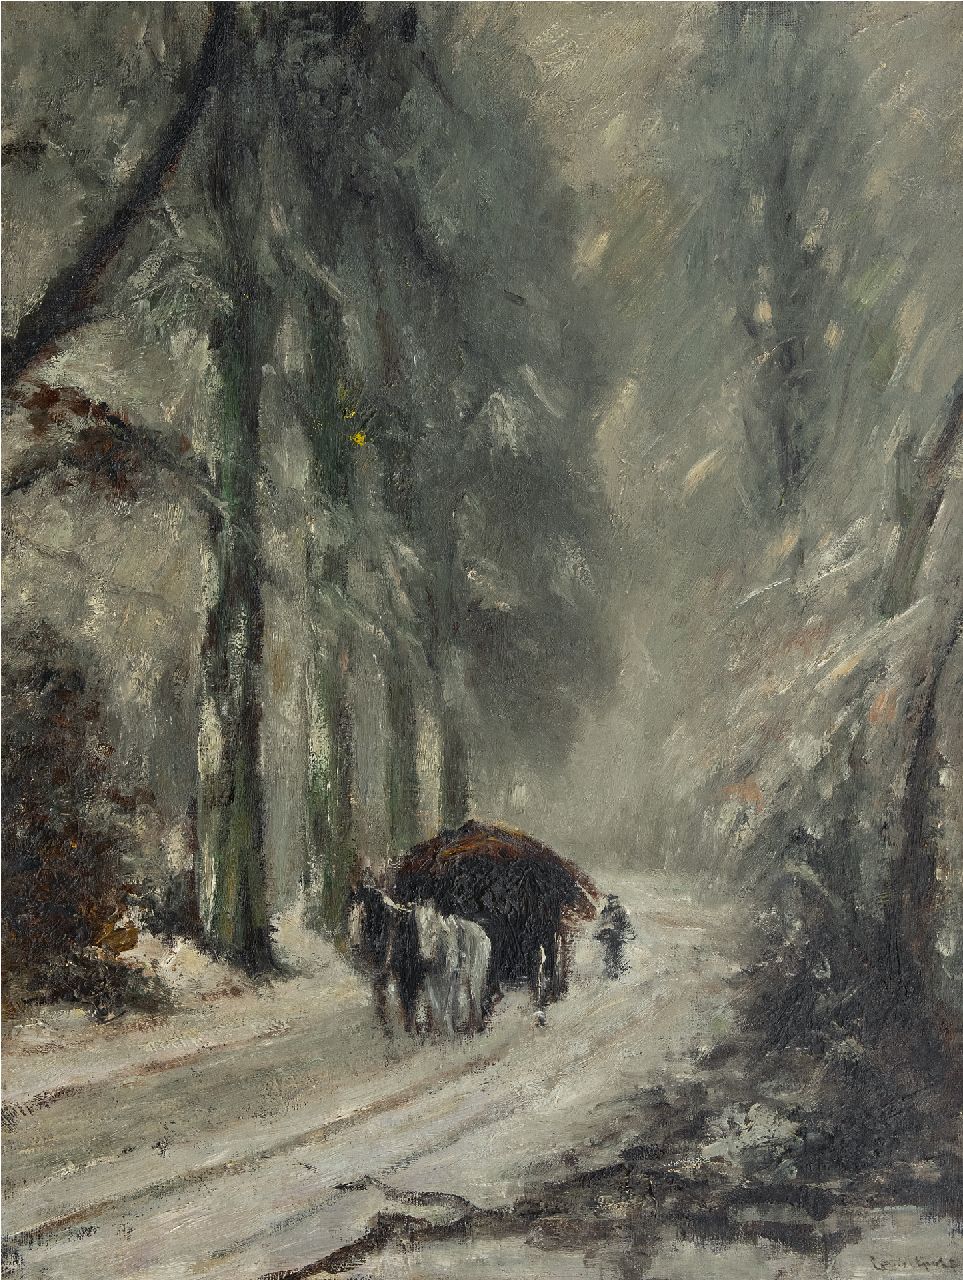 Apol L.F.H.  | Lodewijk Franciscus Hendrik 'Louis' Apol | Paintings offered for sale | After snowfall: horse and cart on snowy forest path, oil on canvas 81.0 x 61.0 cm, signed l.l.